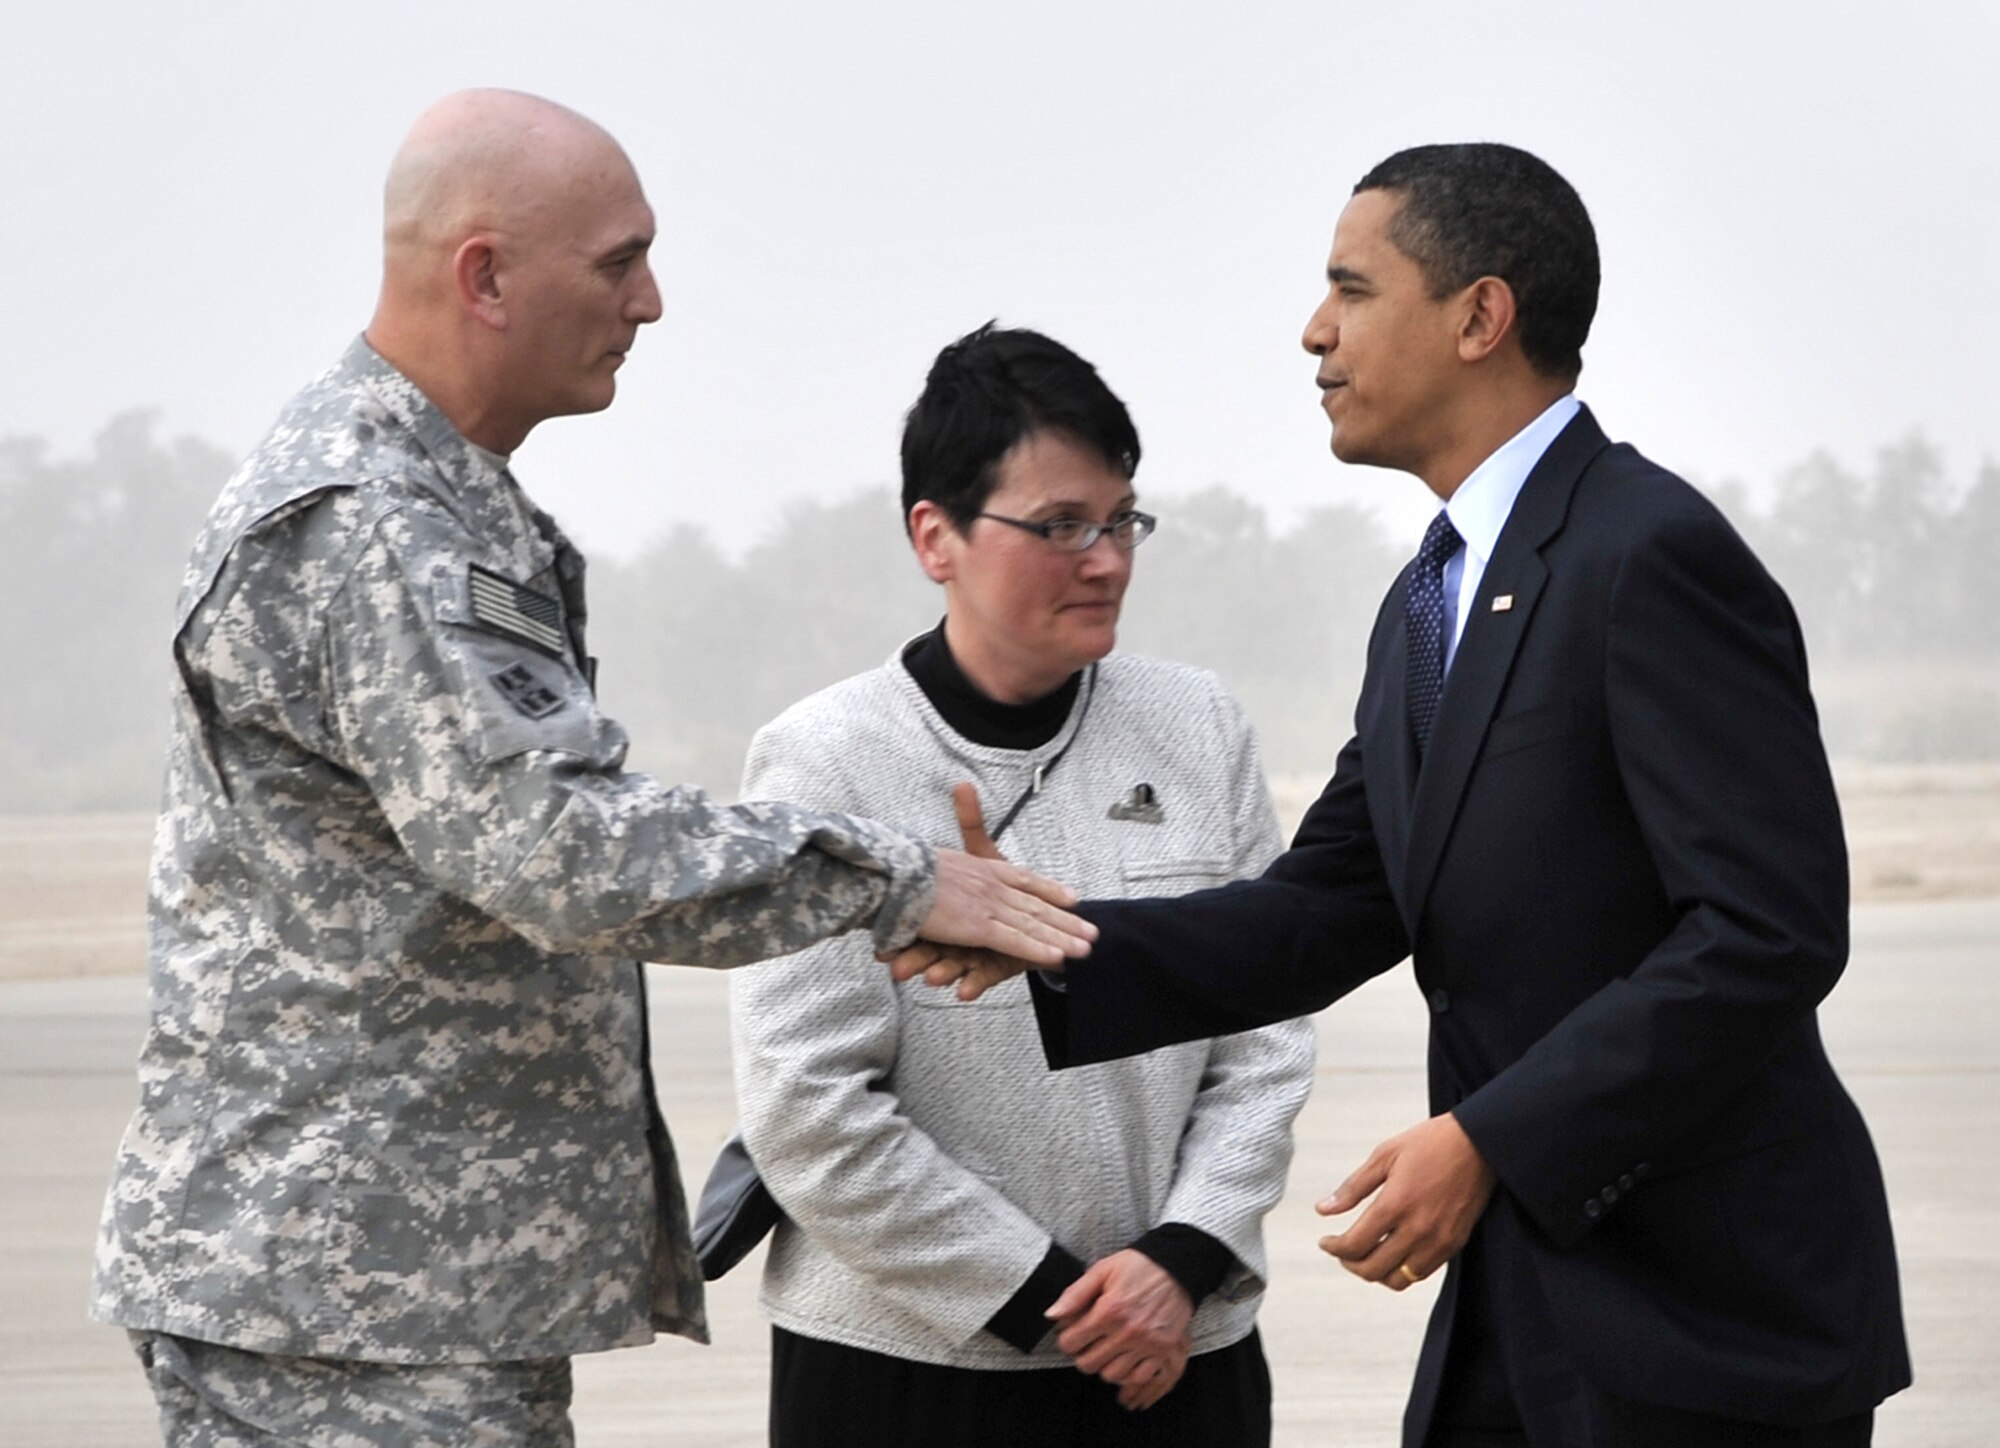 SATHER AIR BASE, Iraq, - Gen. Ray Odierno, commanding general Multi-National Forces Iraq, and U.S. Ambassador Patricia Butenis, greet President Barack Obama on the flightline here April 7. Shortly after arriving, the president addressed a crowd of nearly 1,500, servicemembers, government civilians and contractors, at Al Faw Palace, Camp Victory, Iraq. During his speech, the president commended servicemembers for their focus and dedication and promised them his support. The visit marked the president’s first trip to Iraq since taking office. (U.S. Air Force Photo by Staff Sgt. Amanda Currier)